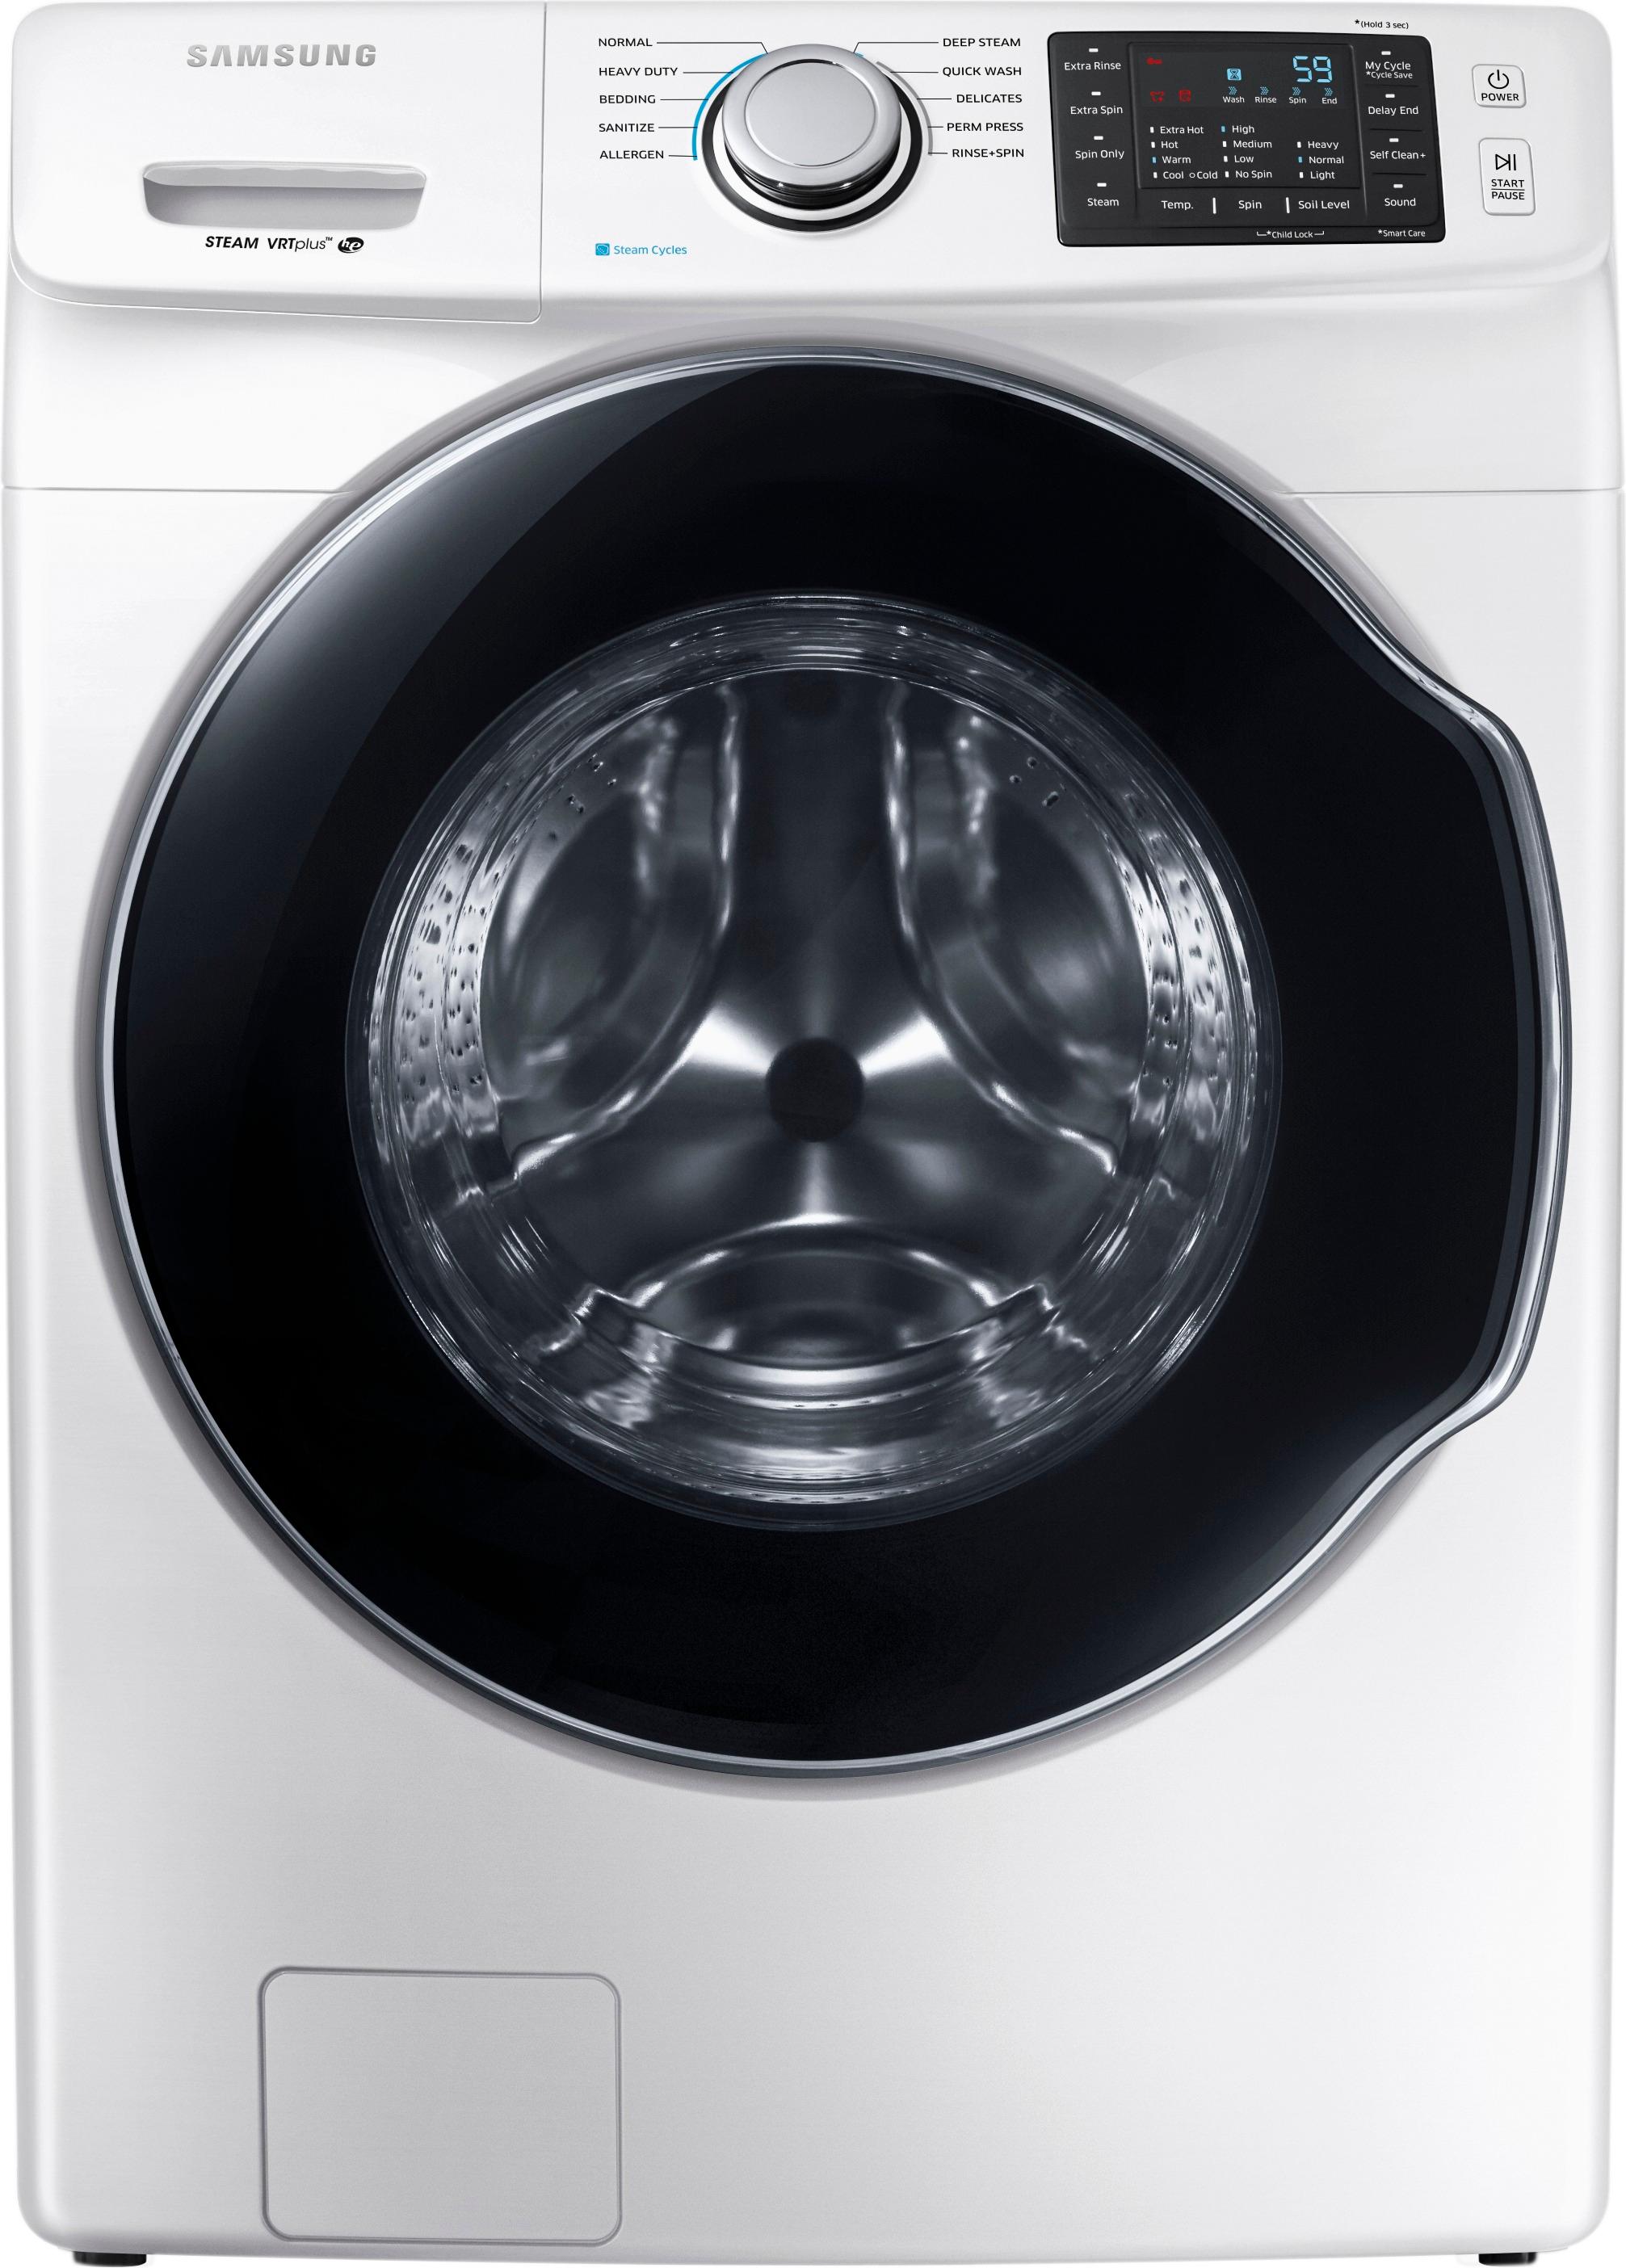 Samsung - 4.5 Cu. Ft. 10-Cycle High-Efficiency Front-Loading Washer with Steam - White